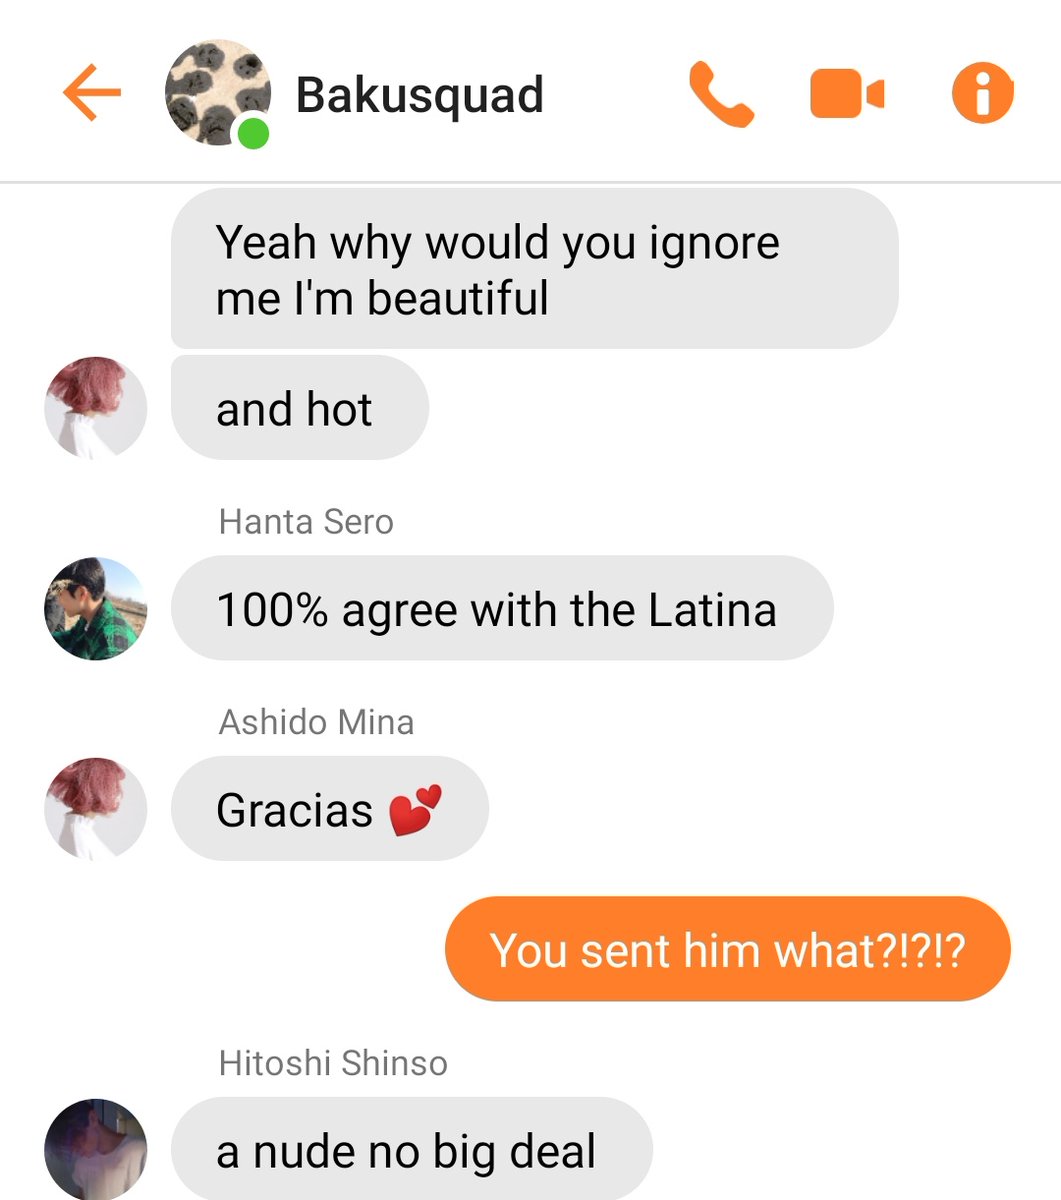 31. Bakusquad official group chat